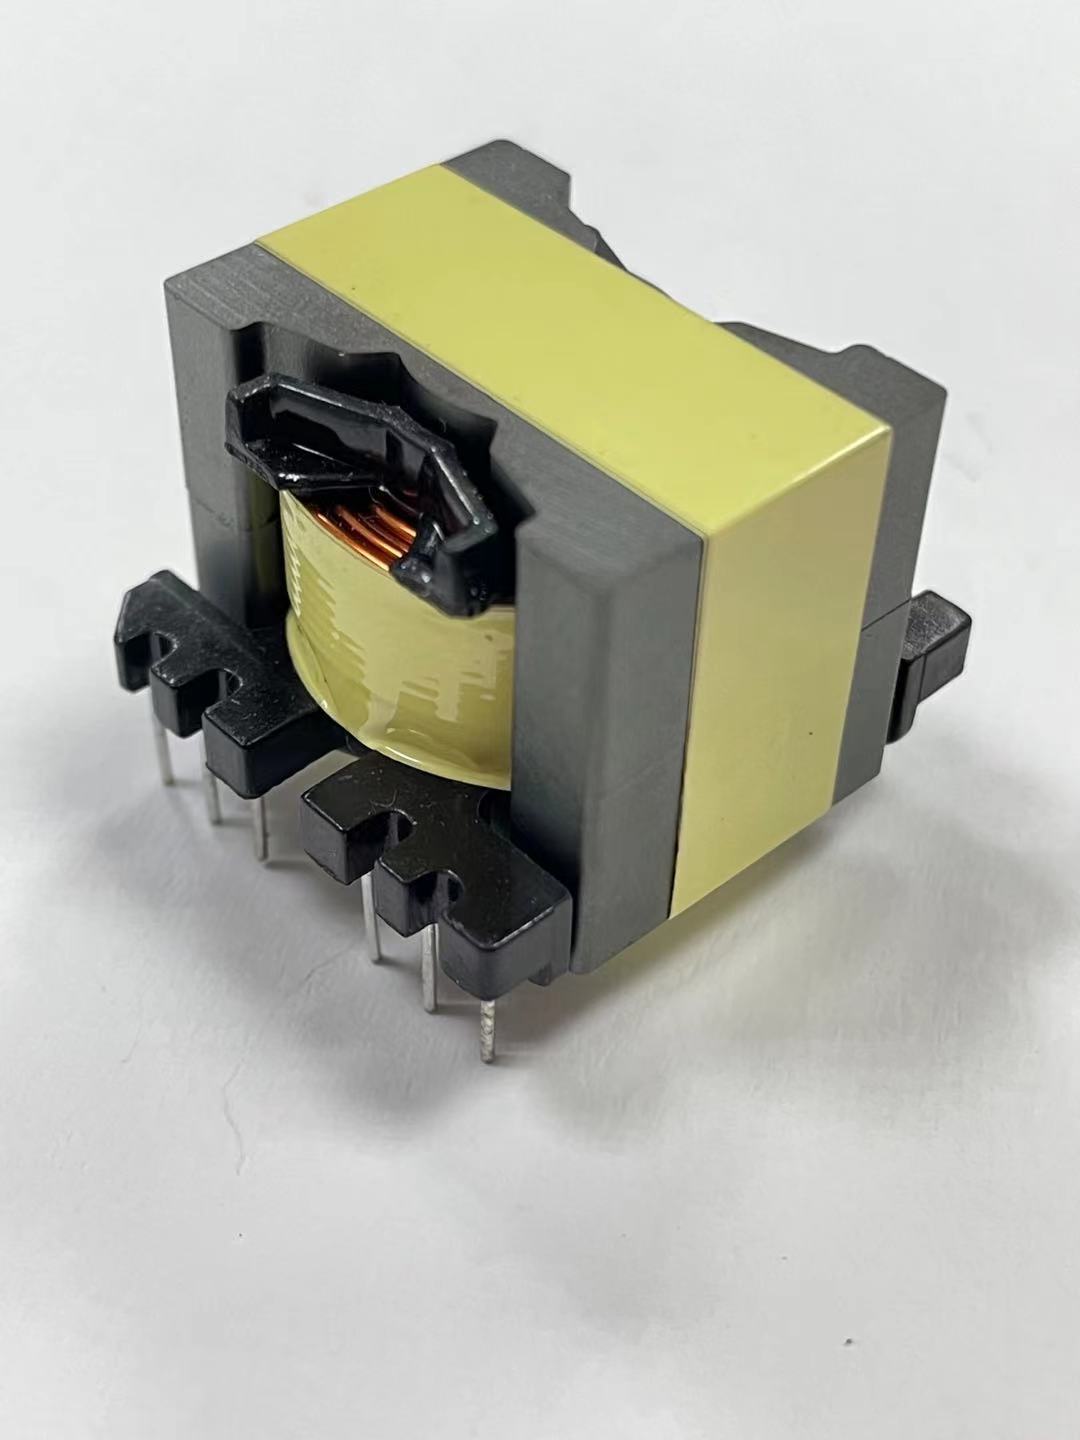 connector, switching power transformer, EV charger